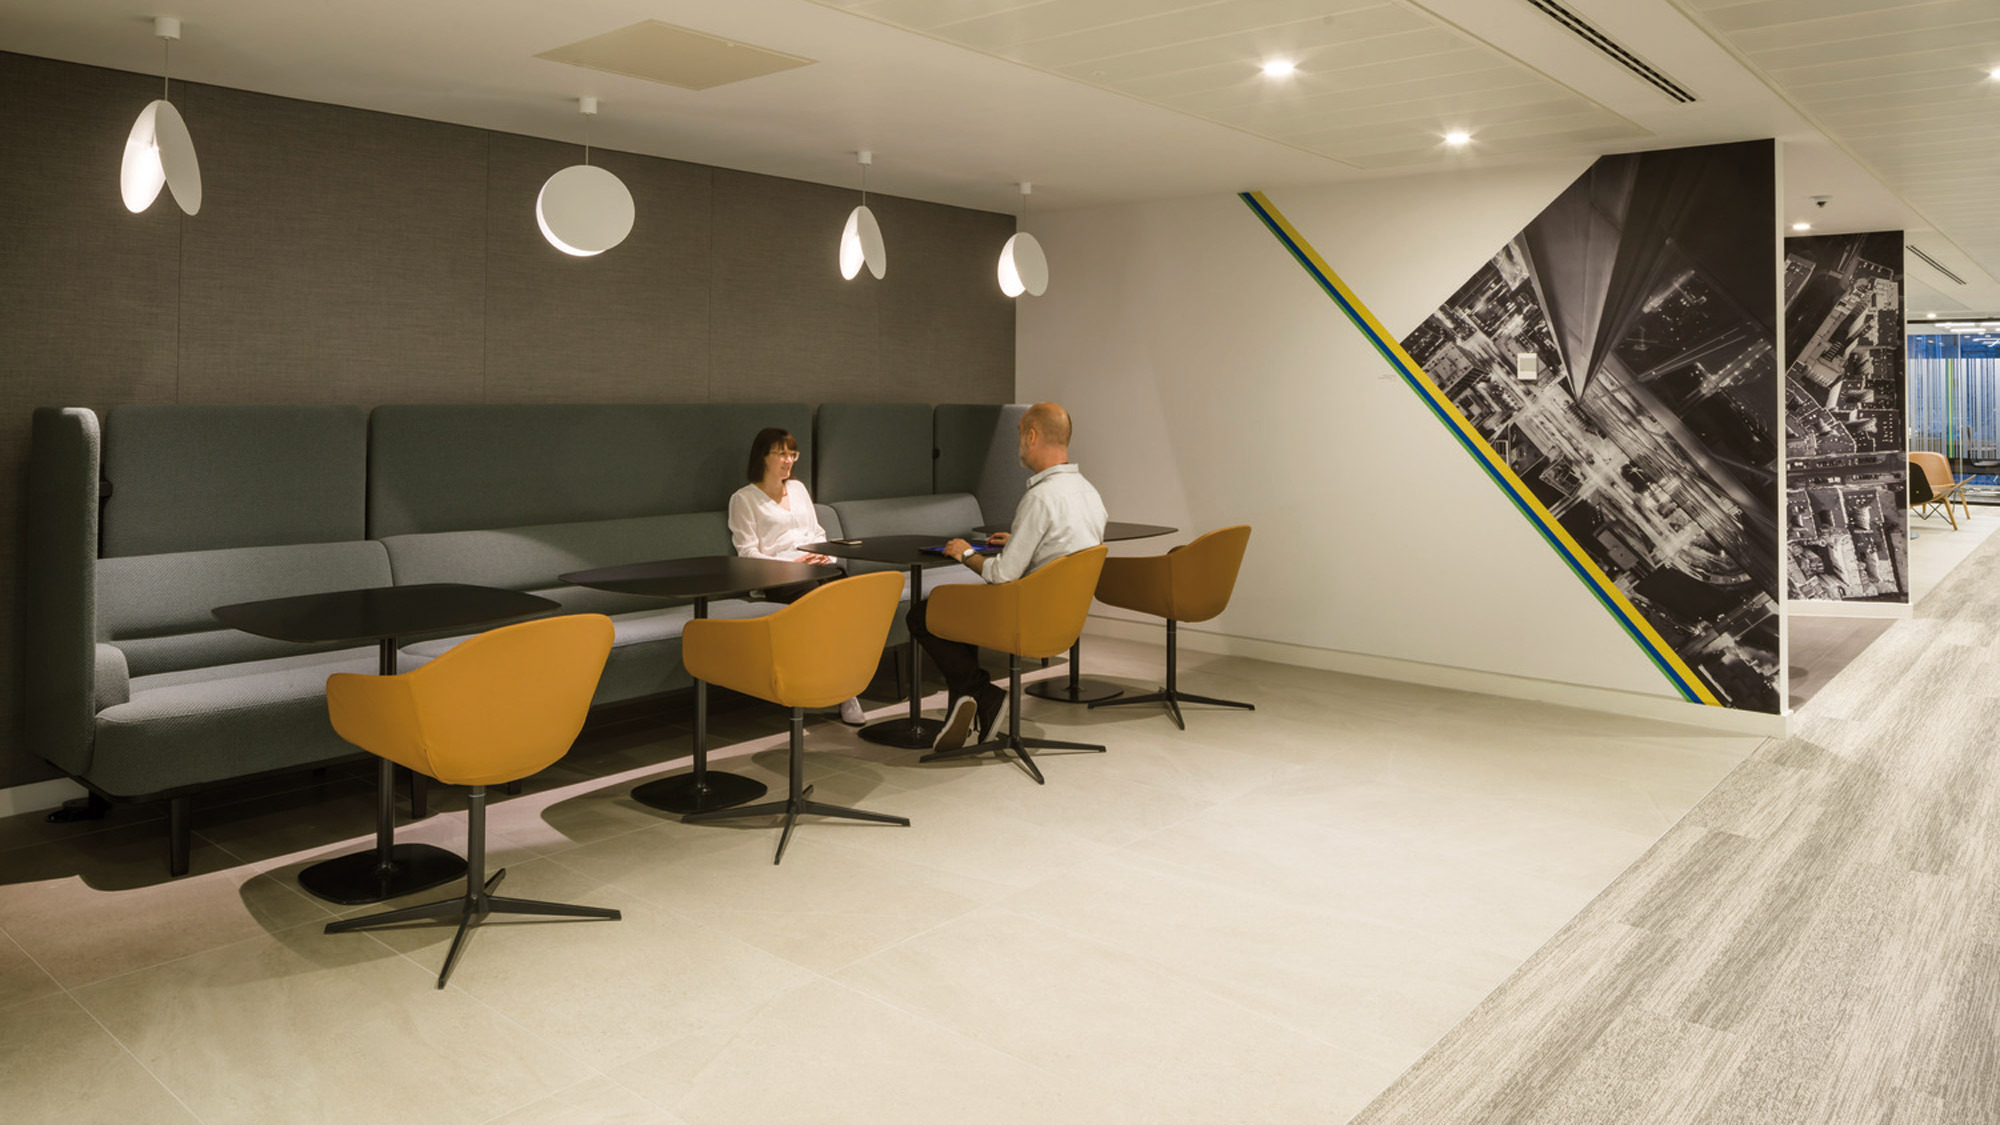 Modern office break area with sleek, gray banquet seating and mustard accent chairs, paired with simple wood-top tables. A monochromatic cityscape mural punctuates the space alongside a bold, diagonally striped accent wall, enhancing the room’s contemporary atmosphere.